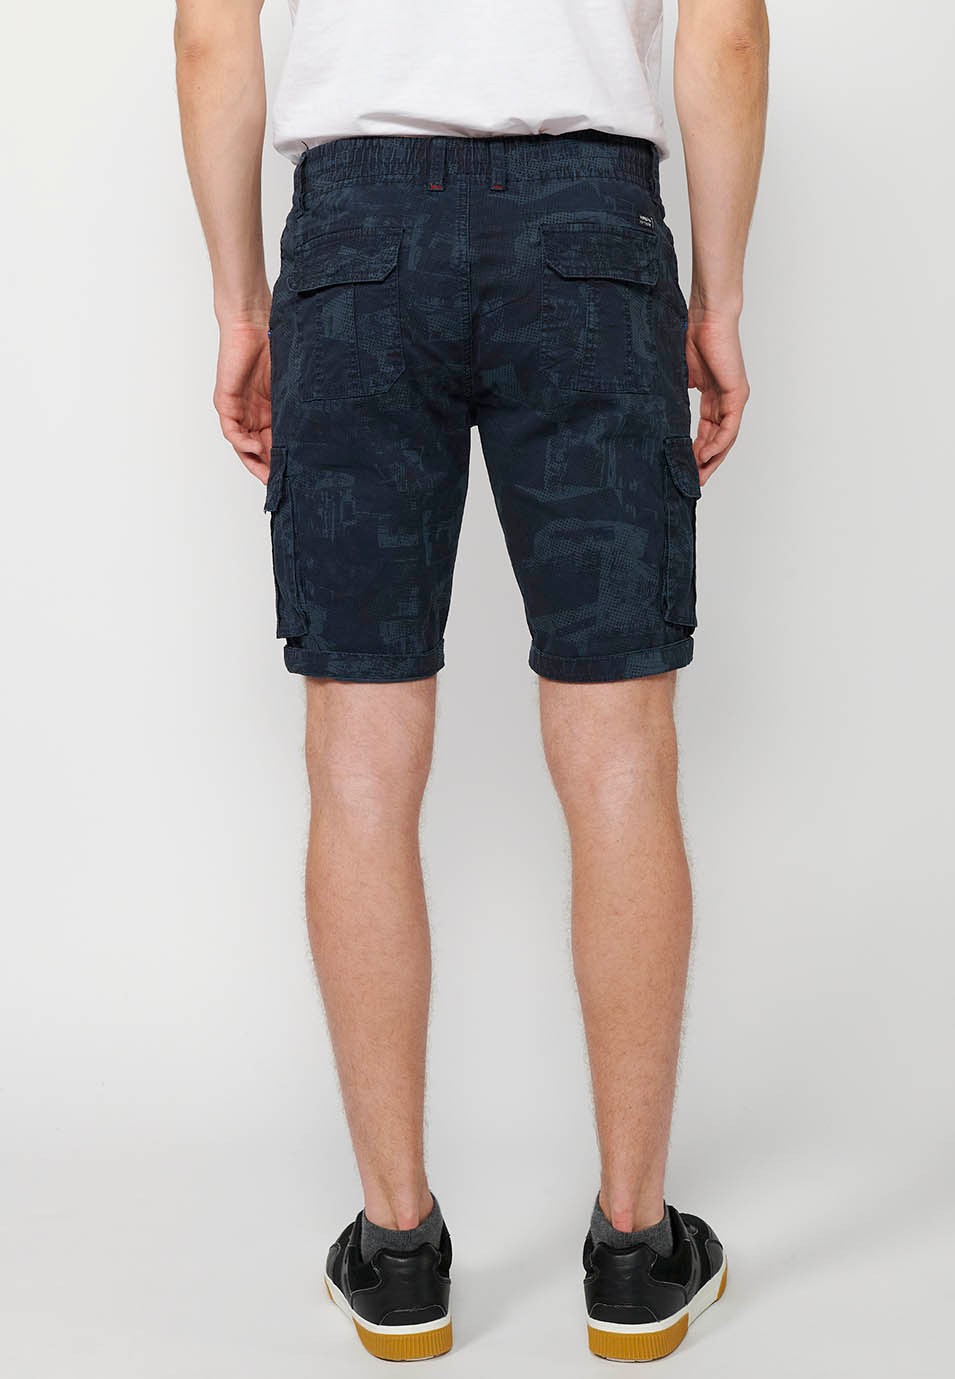 Cargo shorts with front closure with zipper and button and four pockets, two rear pockets with flap with two cargo pockets with flap and adjustable waist with drawstring in Blue for Men 1